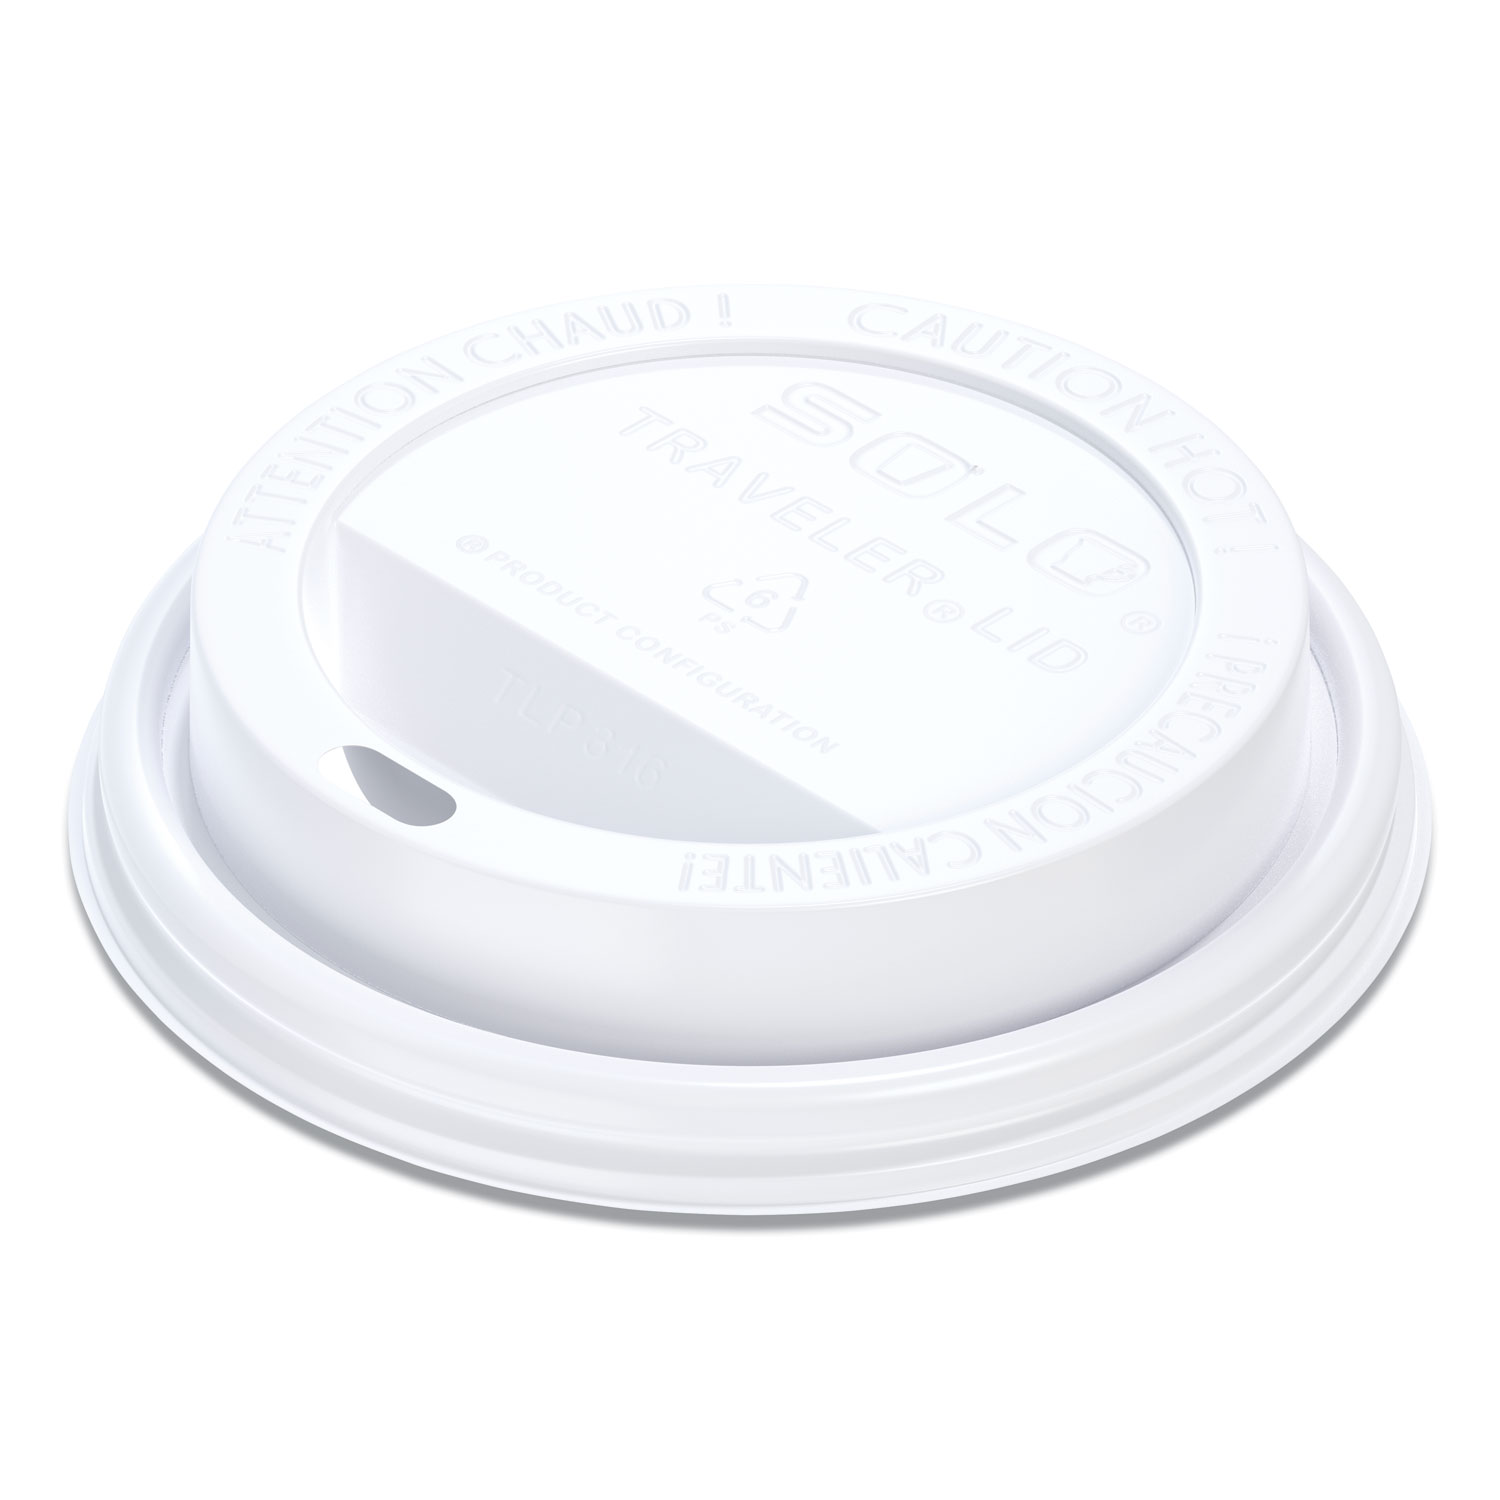  Dart TLP316-0007 Traveler Cappuccino Style Dome Lid, Polystyrene, Fits 10-24 oz Hot Cups, White, 100/Pack (SCC896404) 